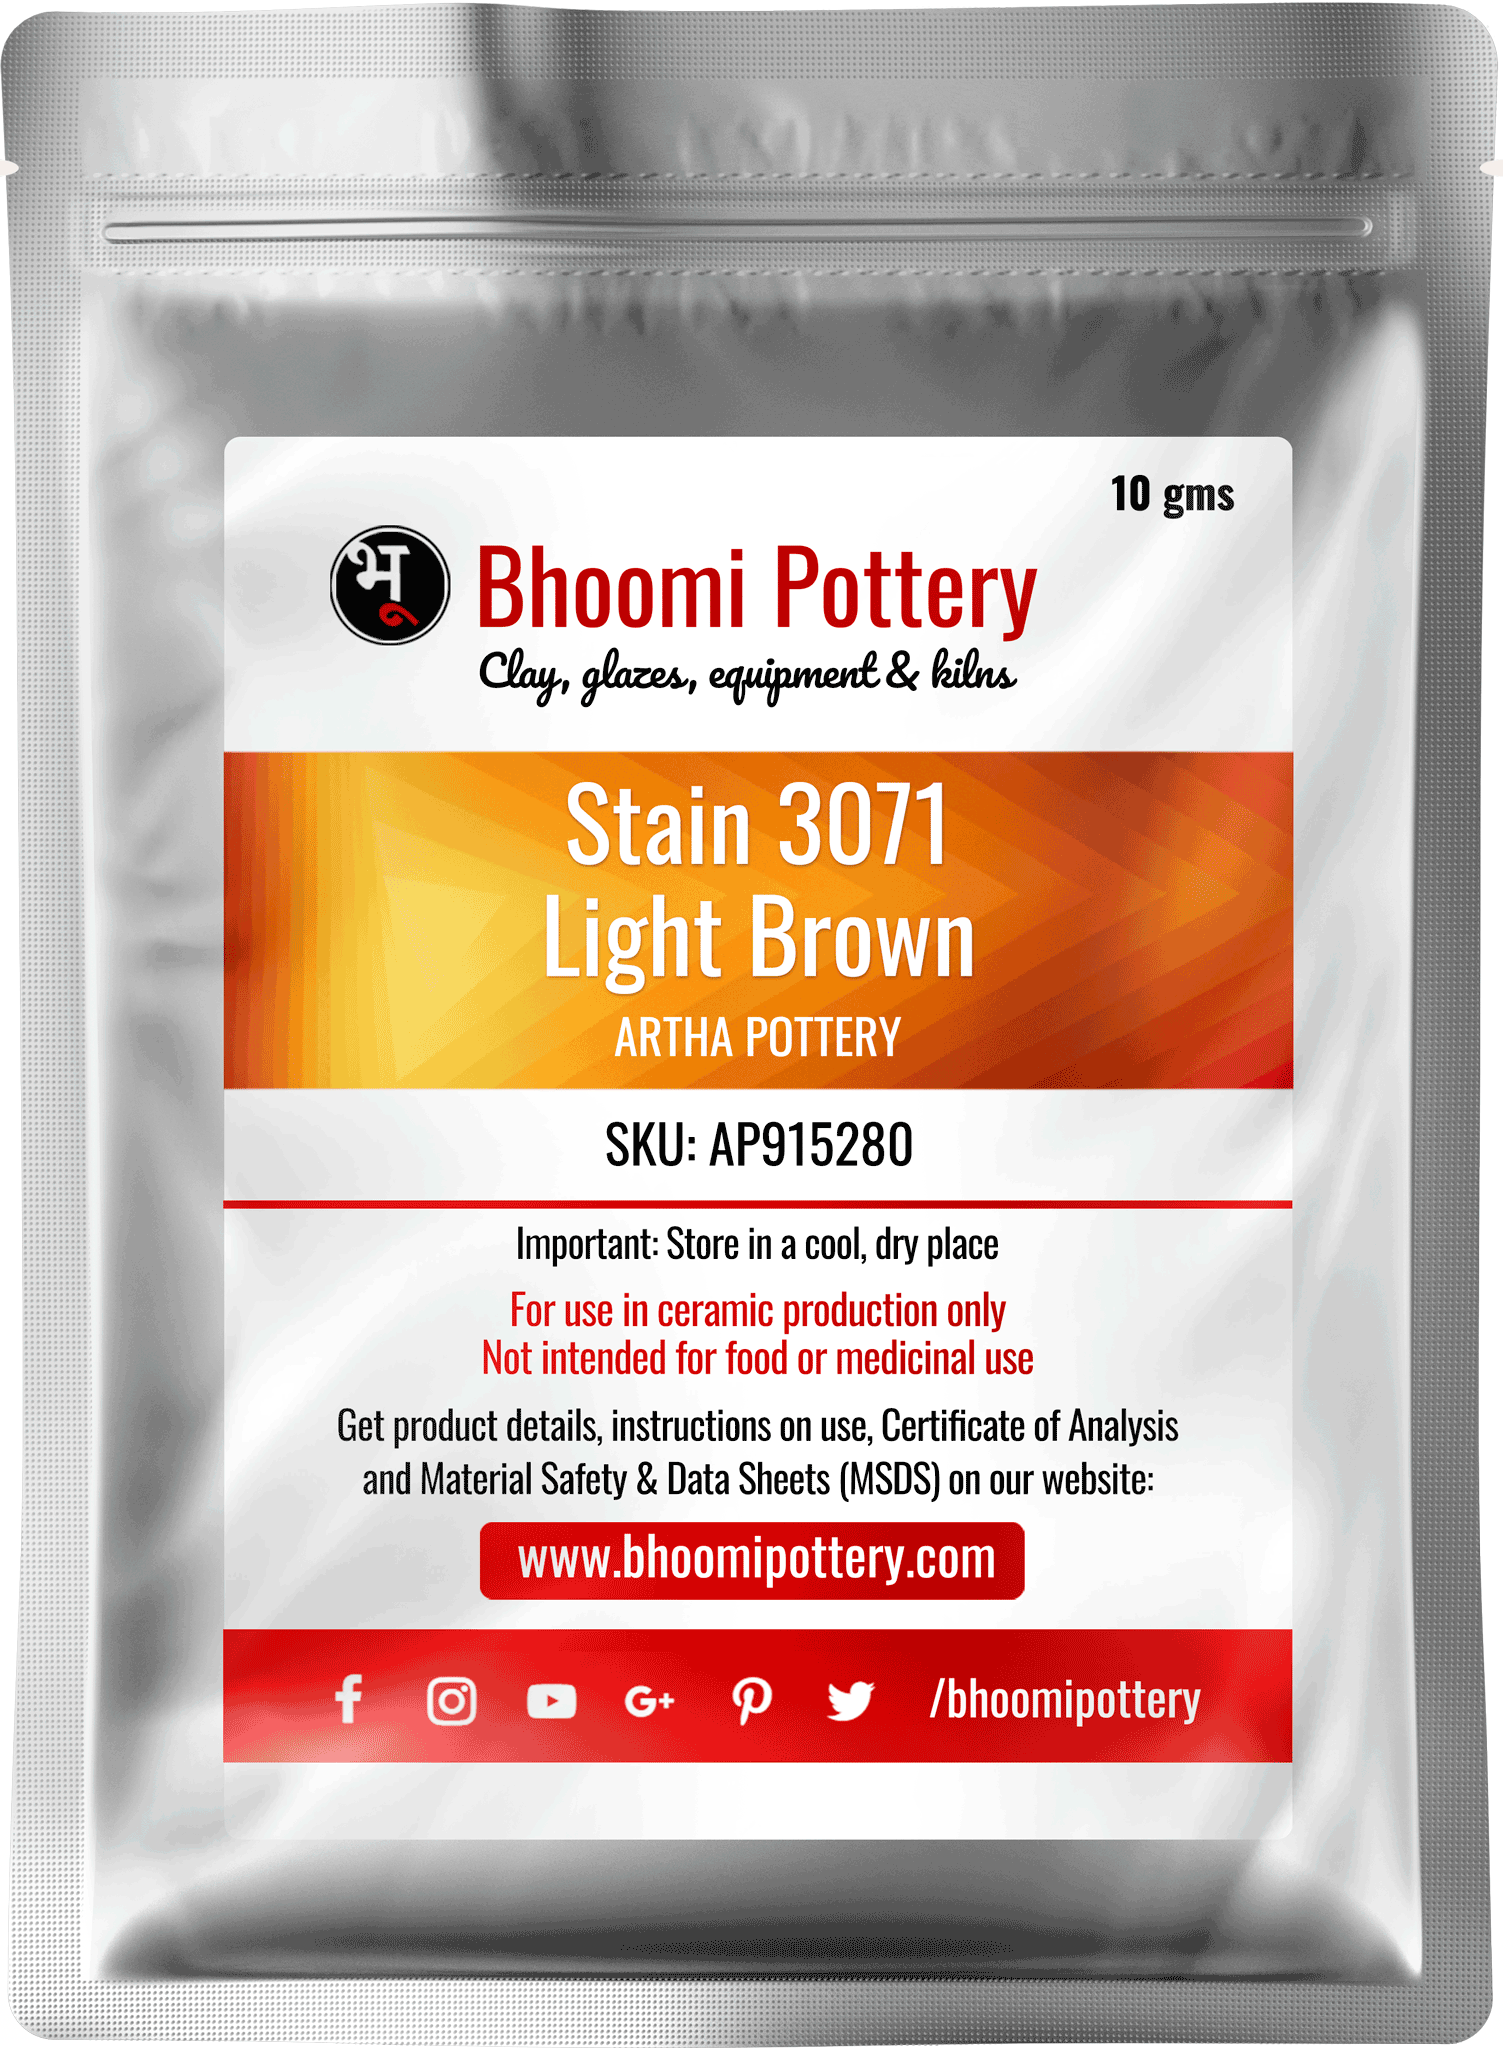 Artha Pottery Stain 3071 Light Brown 100 gms for sale in India - Bhoomi Pottery